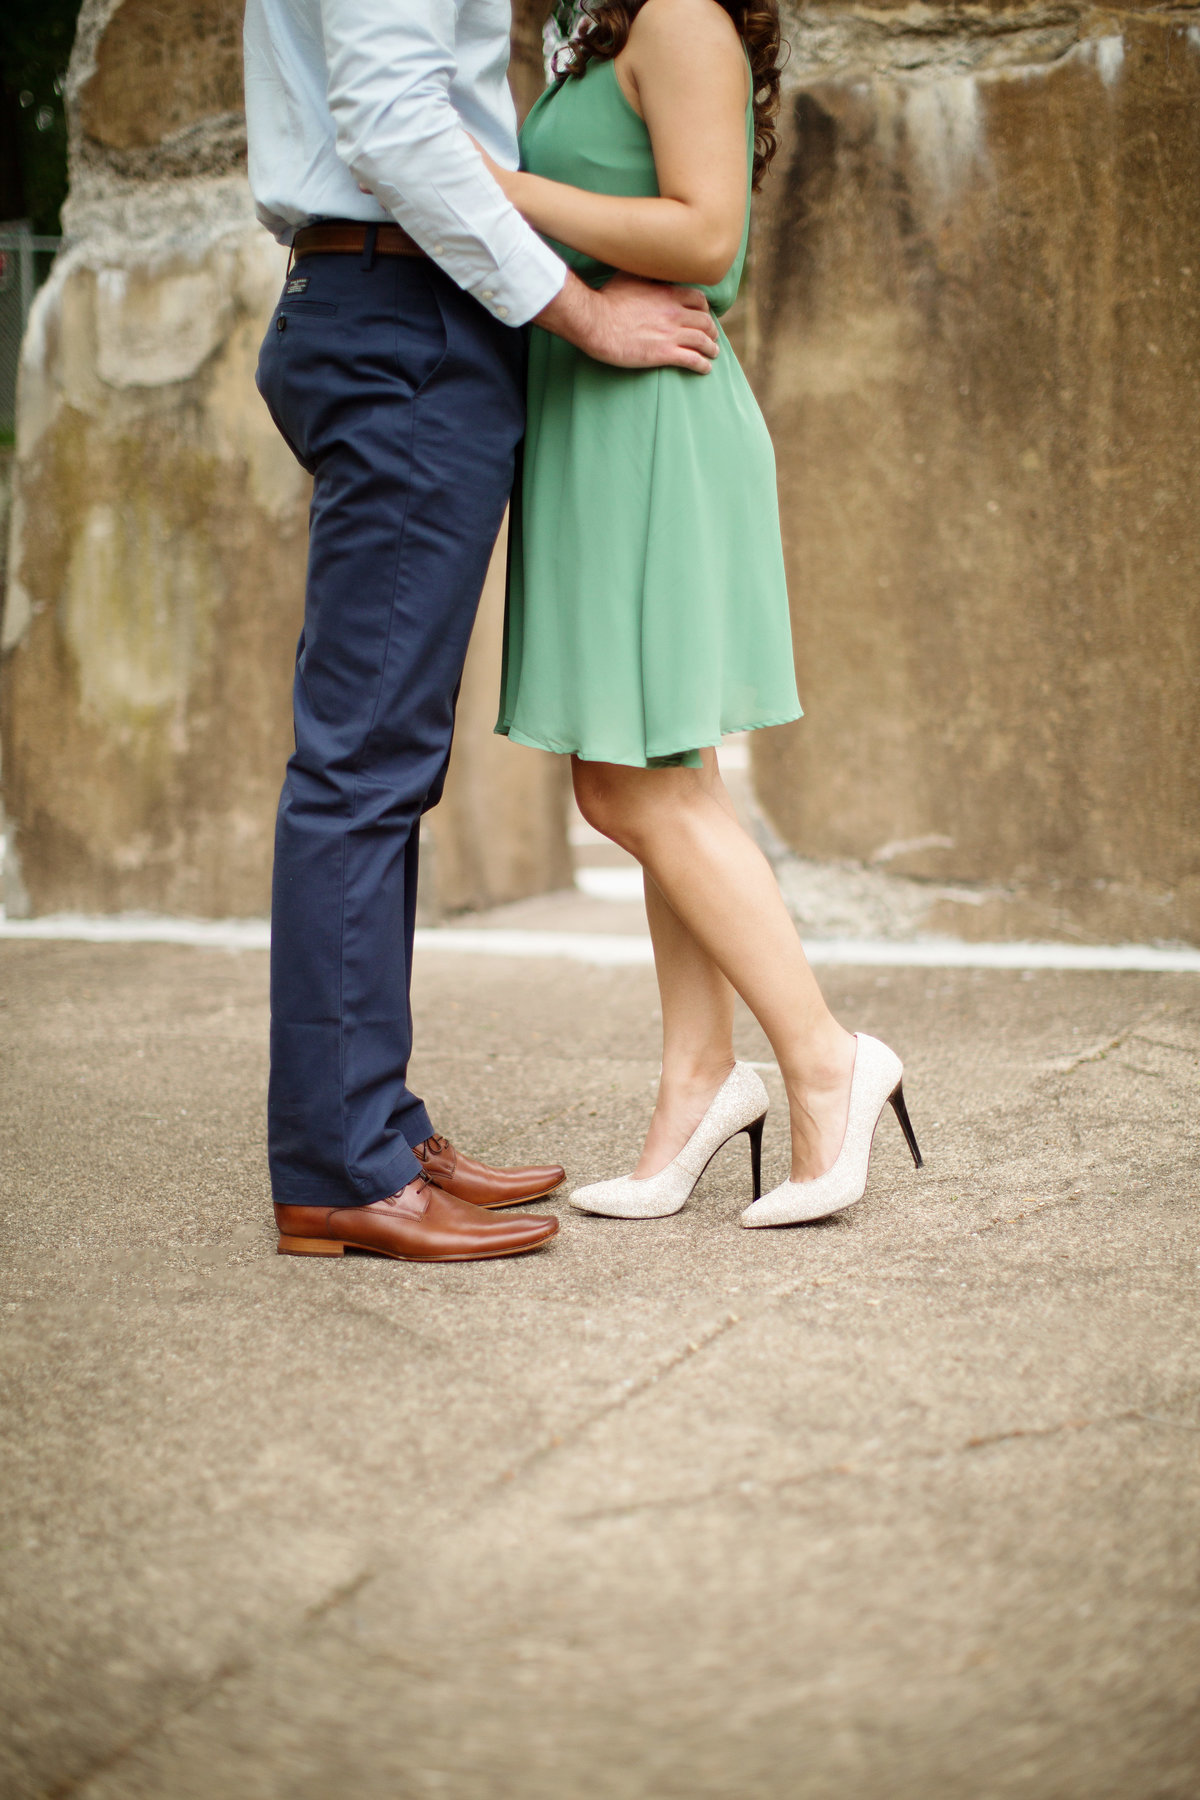 MICHELLE+REED-ENGAGEMENT PHOTOS-047